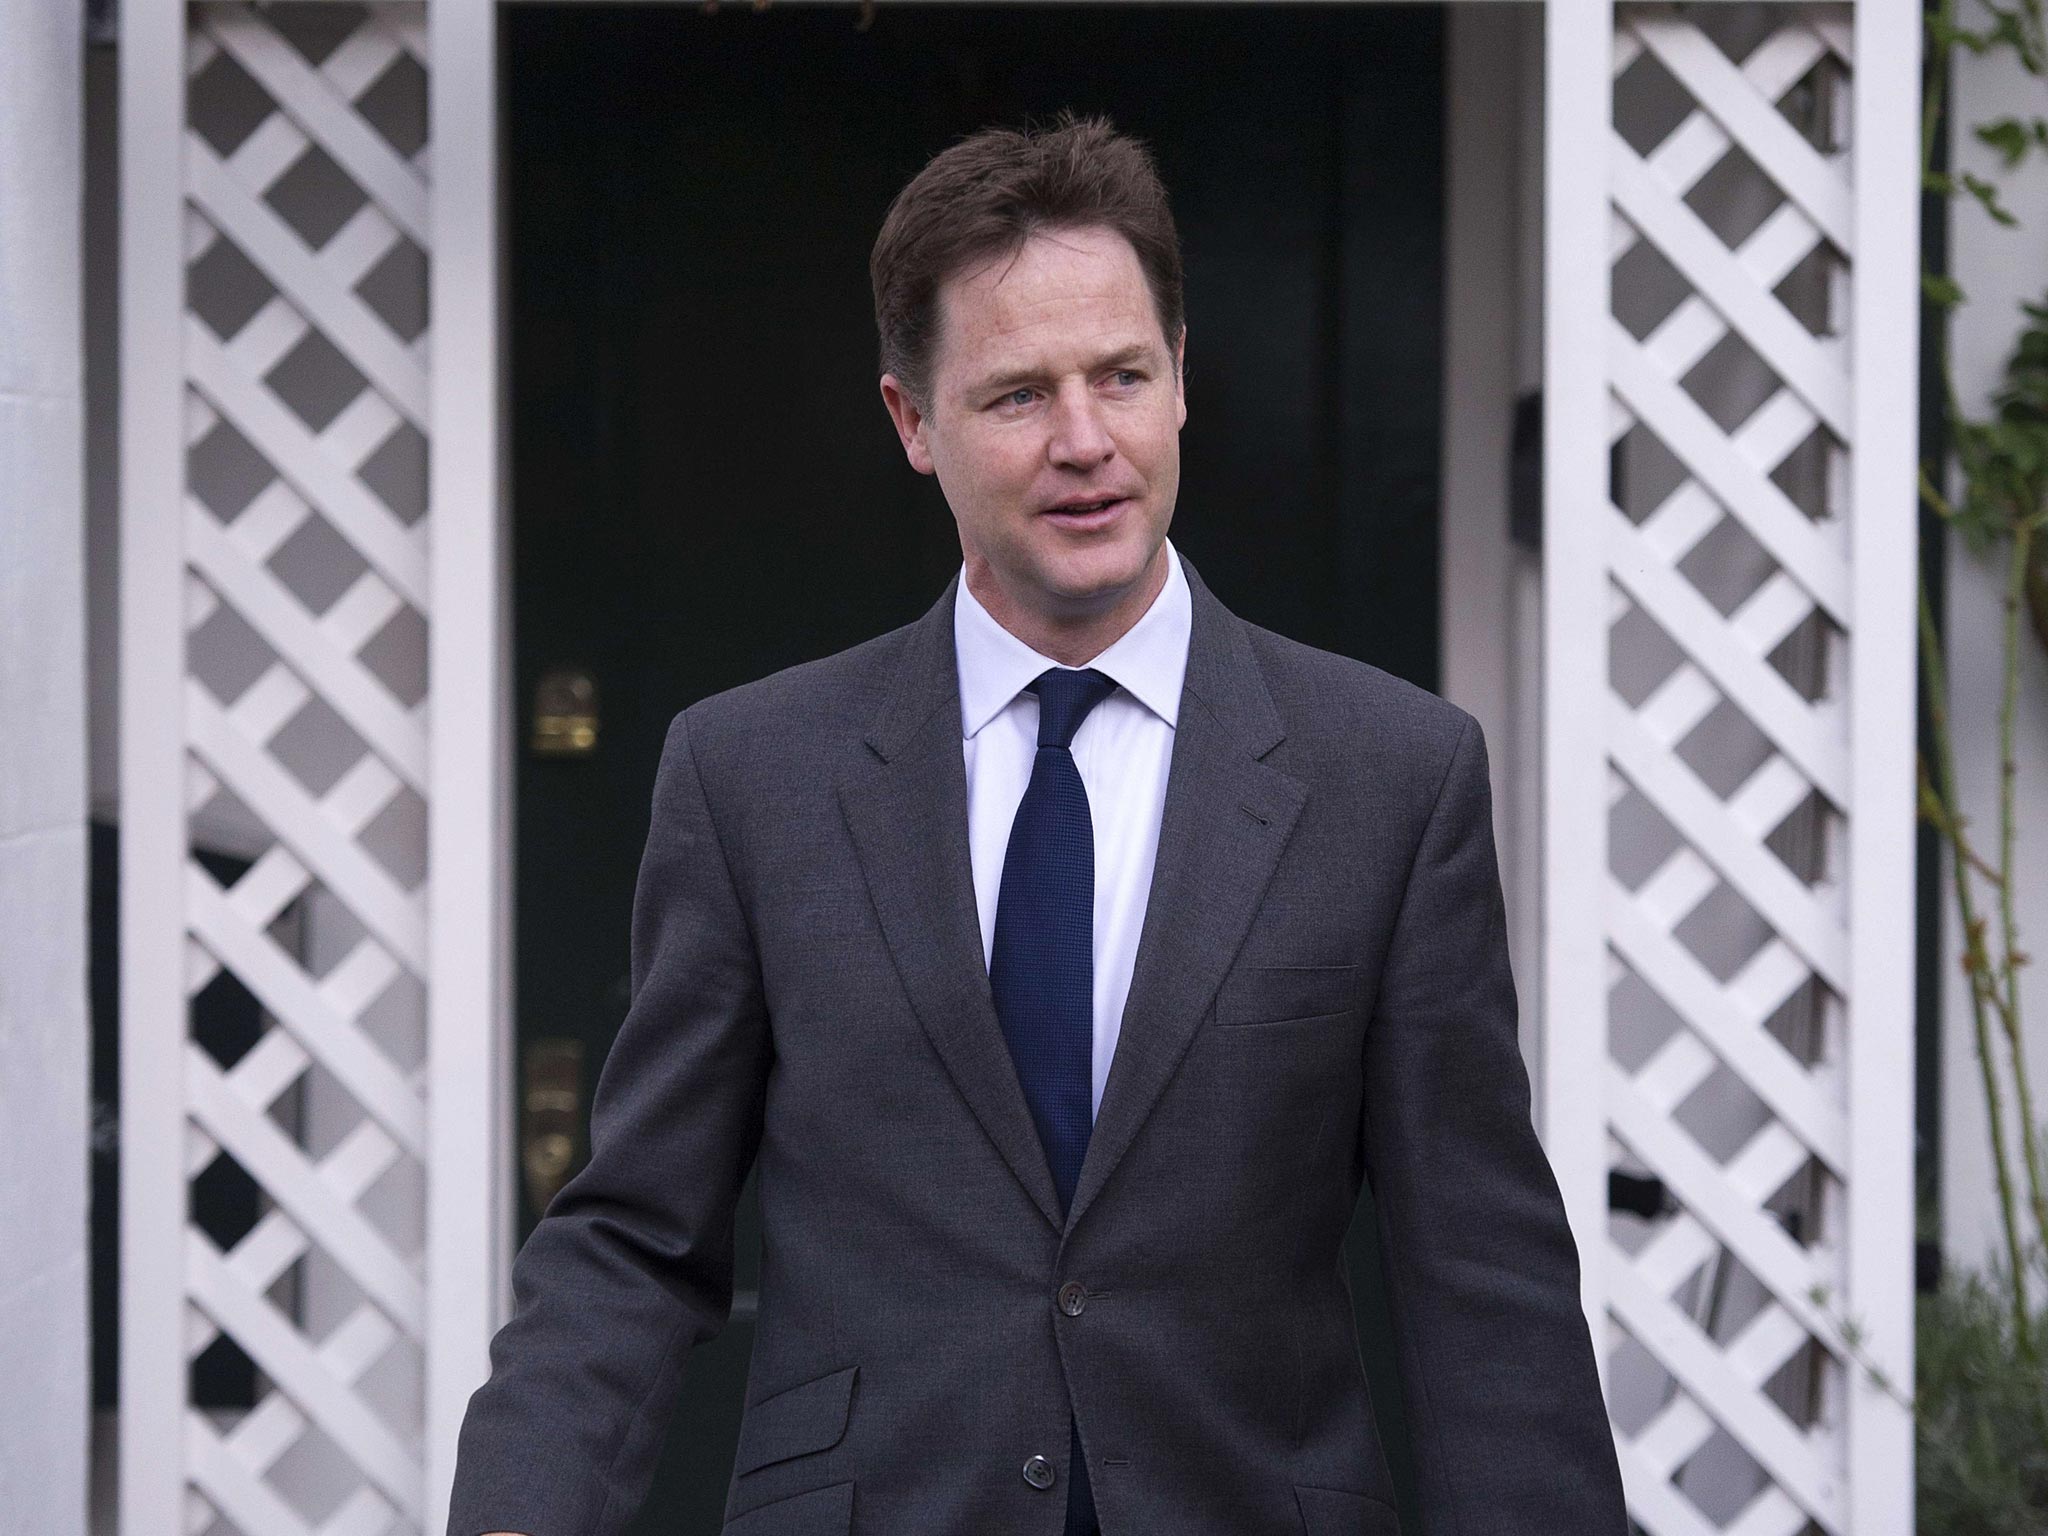 Nick Clegg has insisted he would not consider resigning following its fourth successive dismal showing in the local elections